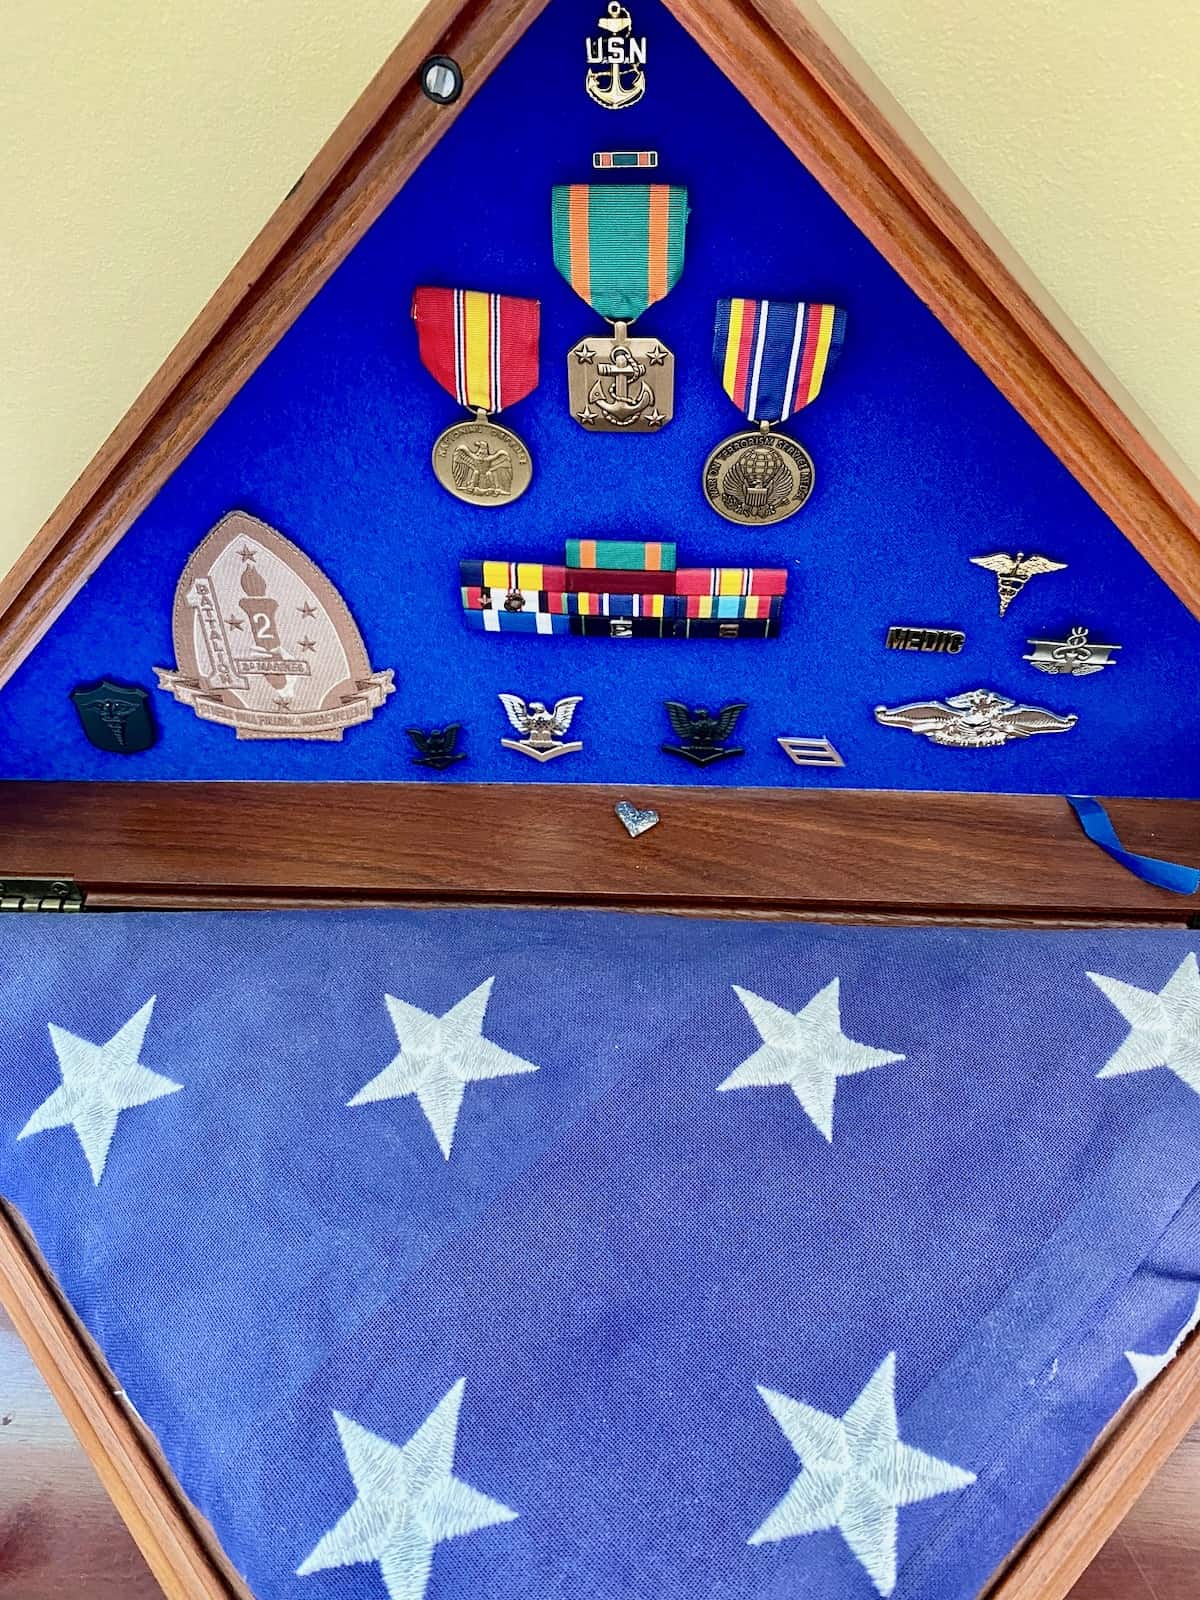 Ten years memorial flag and medals remain on display